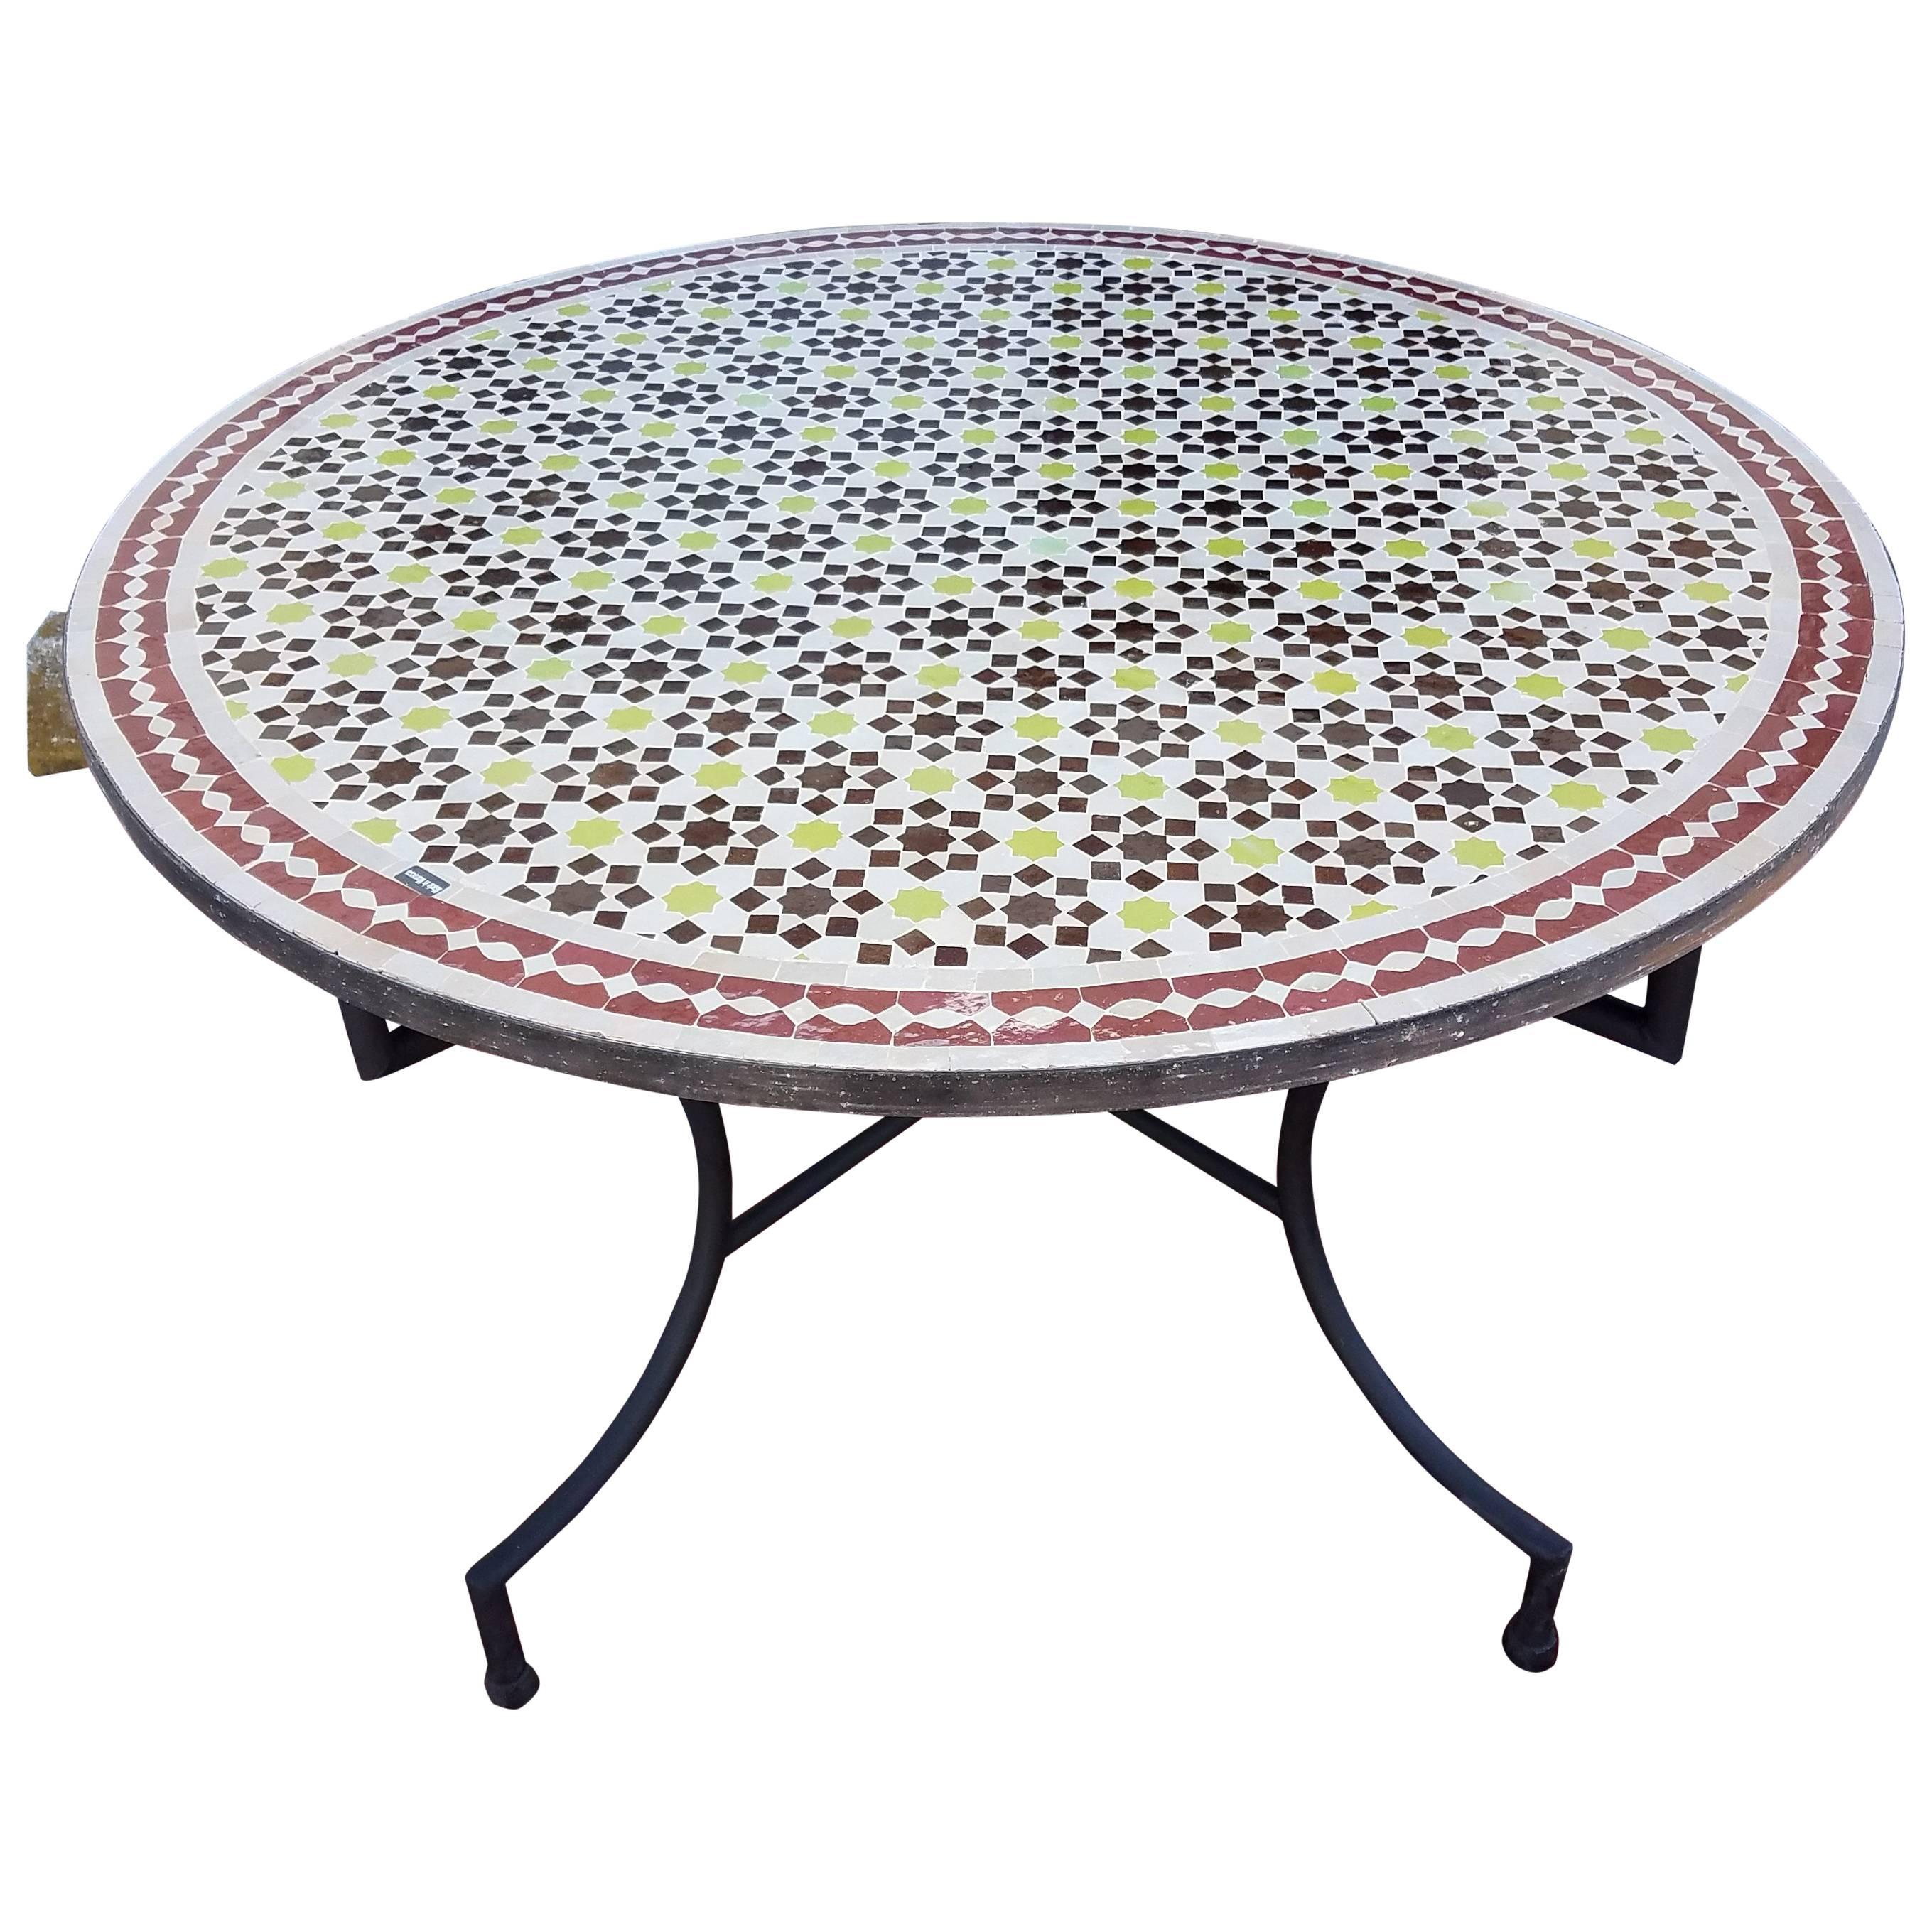 Multi-Color Mosaic Table, Wrought Iron Base Included For Sale